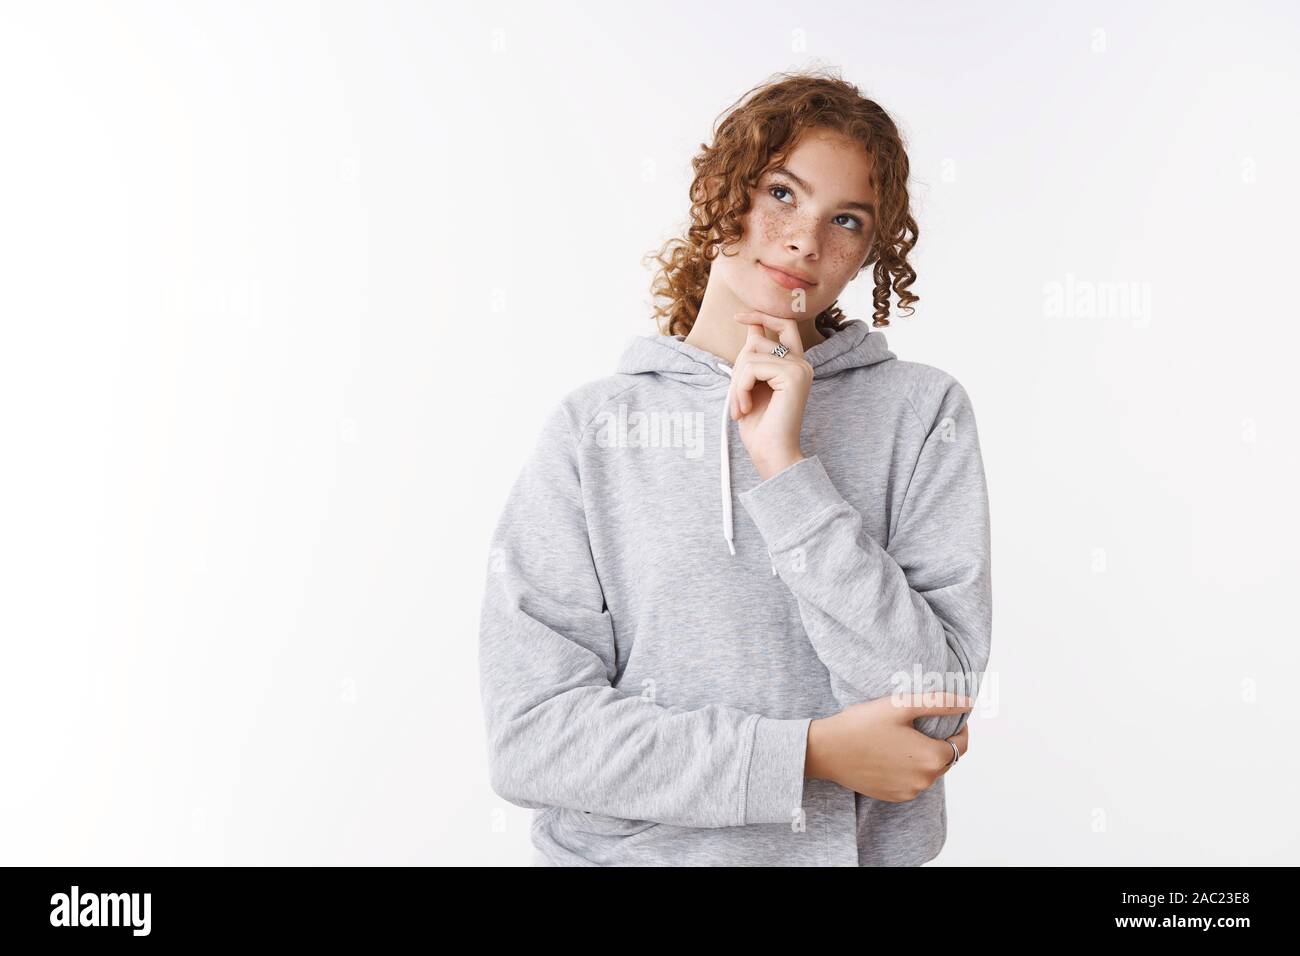 Thoughtful cute dreamy young caucasian ginger girl with freckles pimples wearing grey hoodie thinking look doubtful up make decision remember number Stock Photo